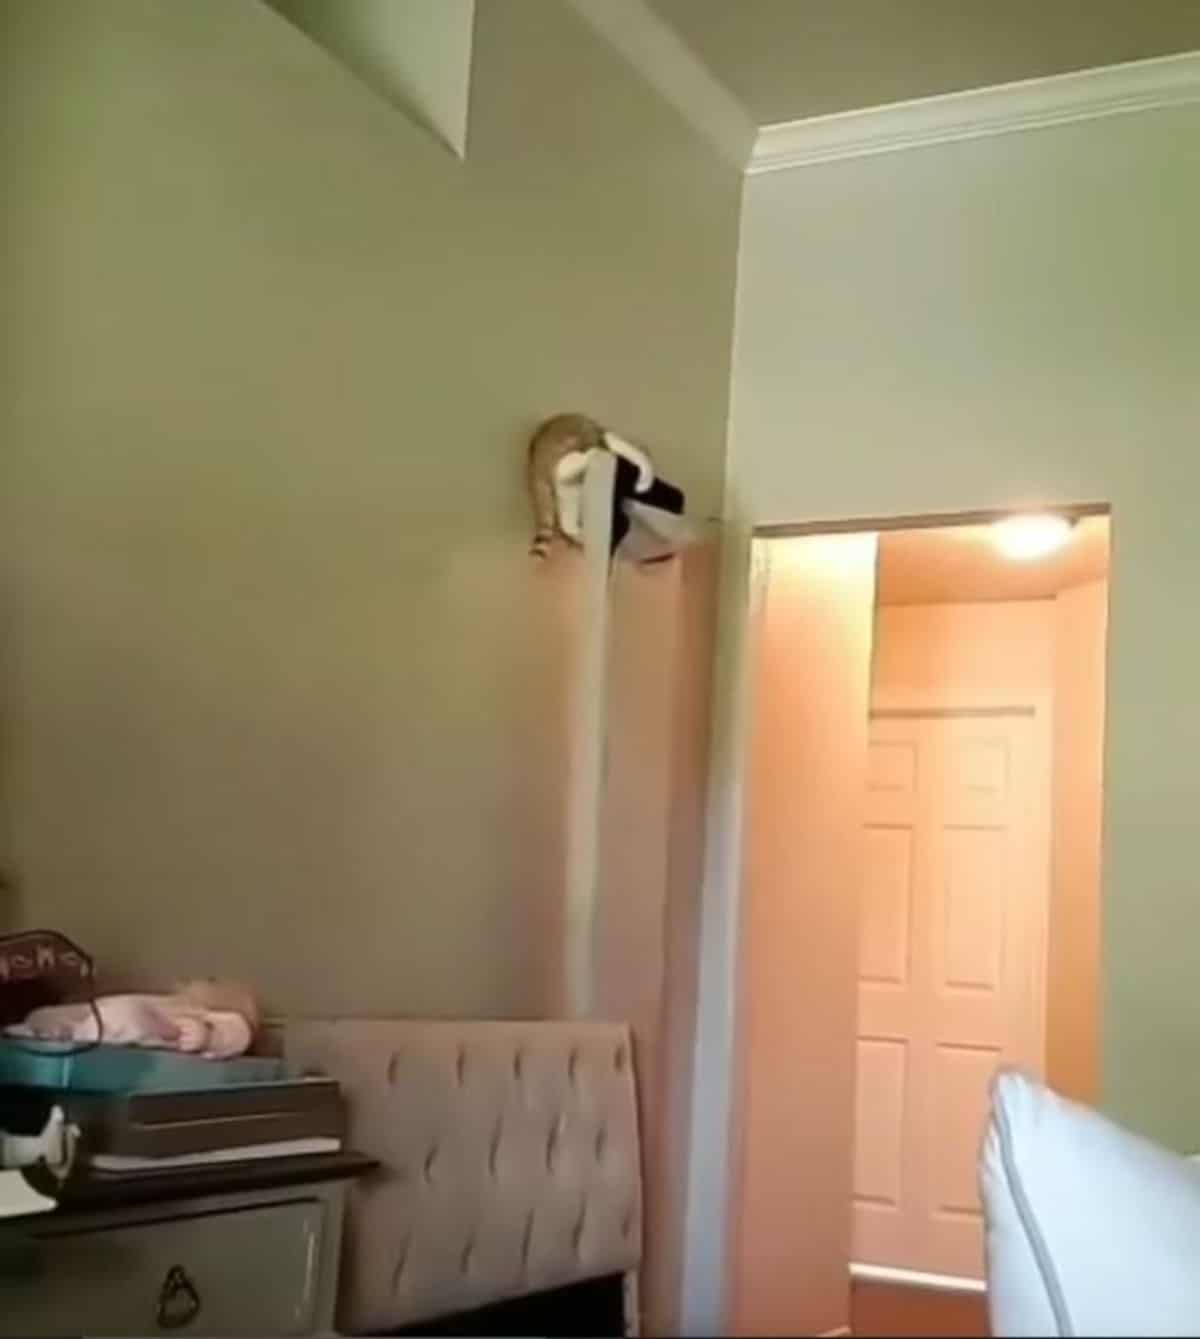 brown and white tabby cat standing at the top of an unattached door and falling over when it moves away from the wall